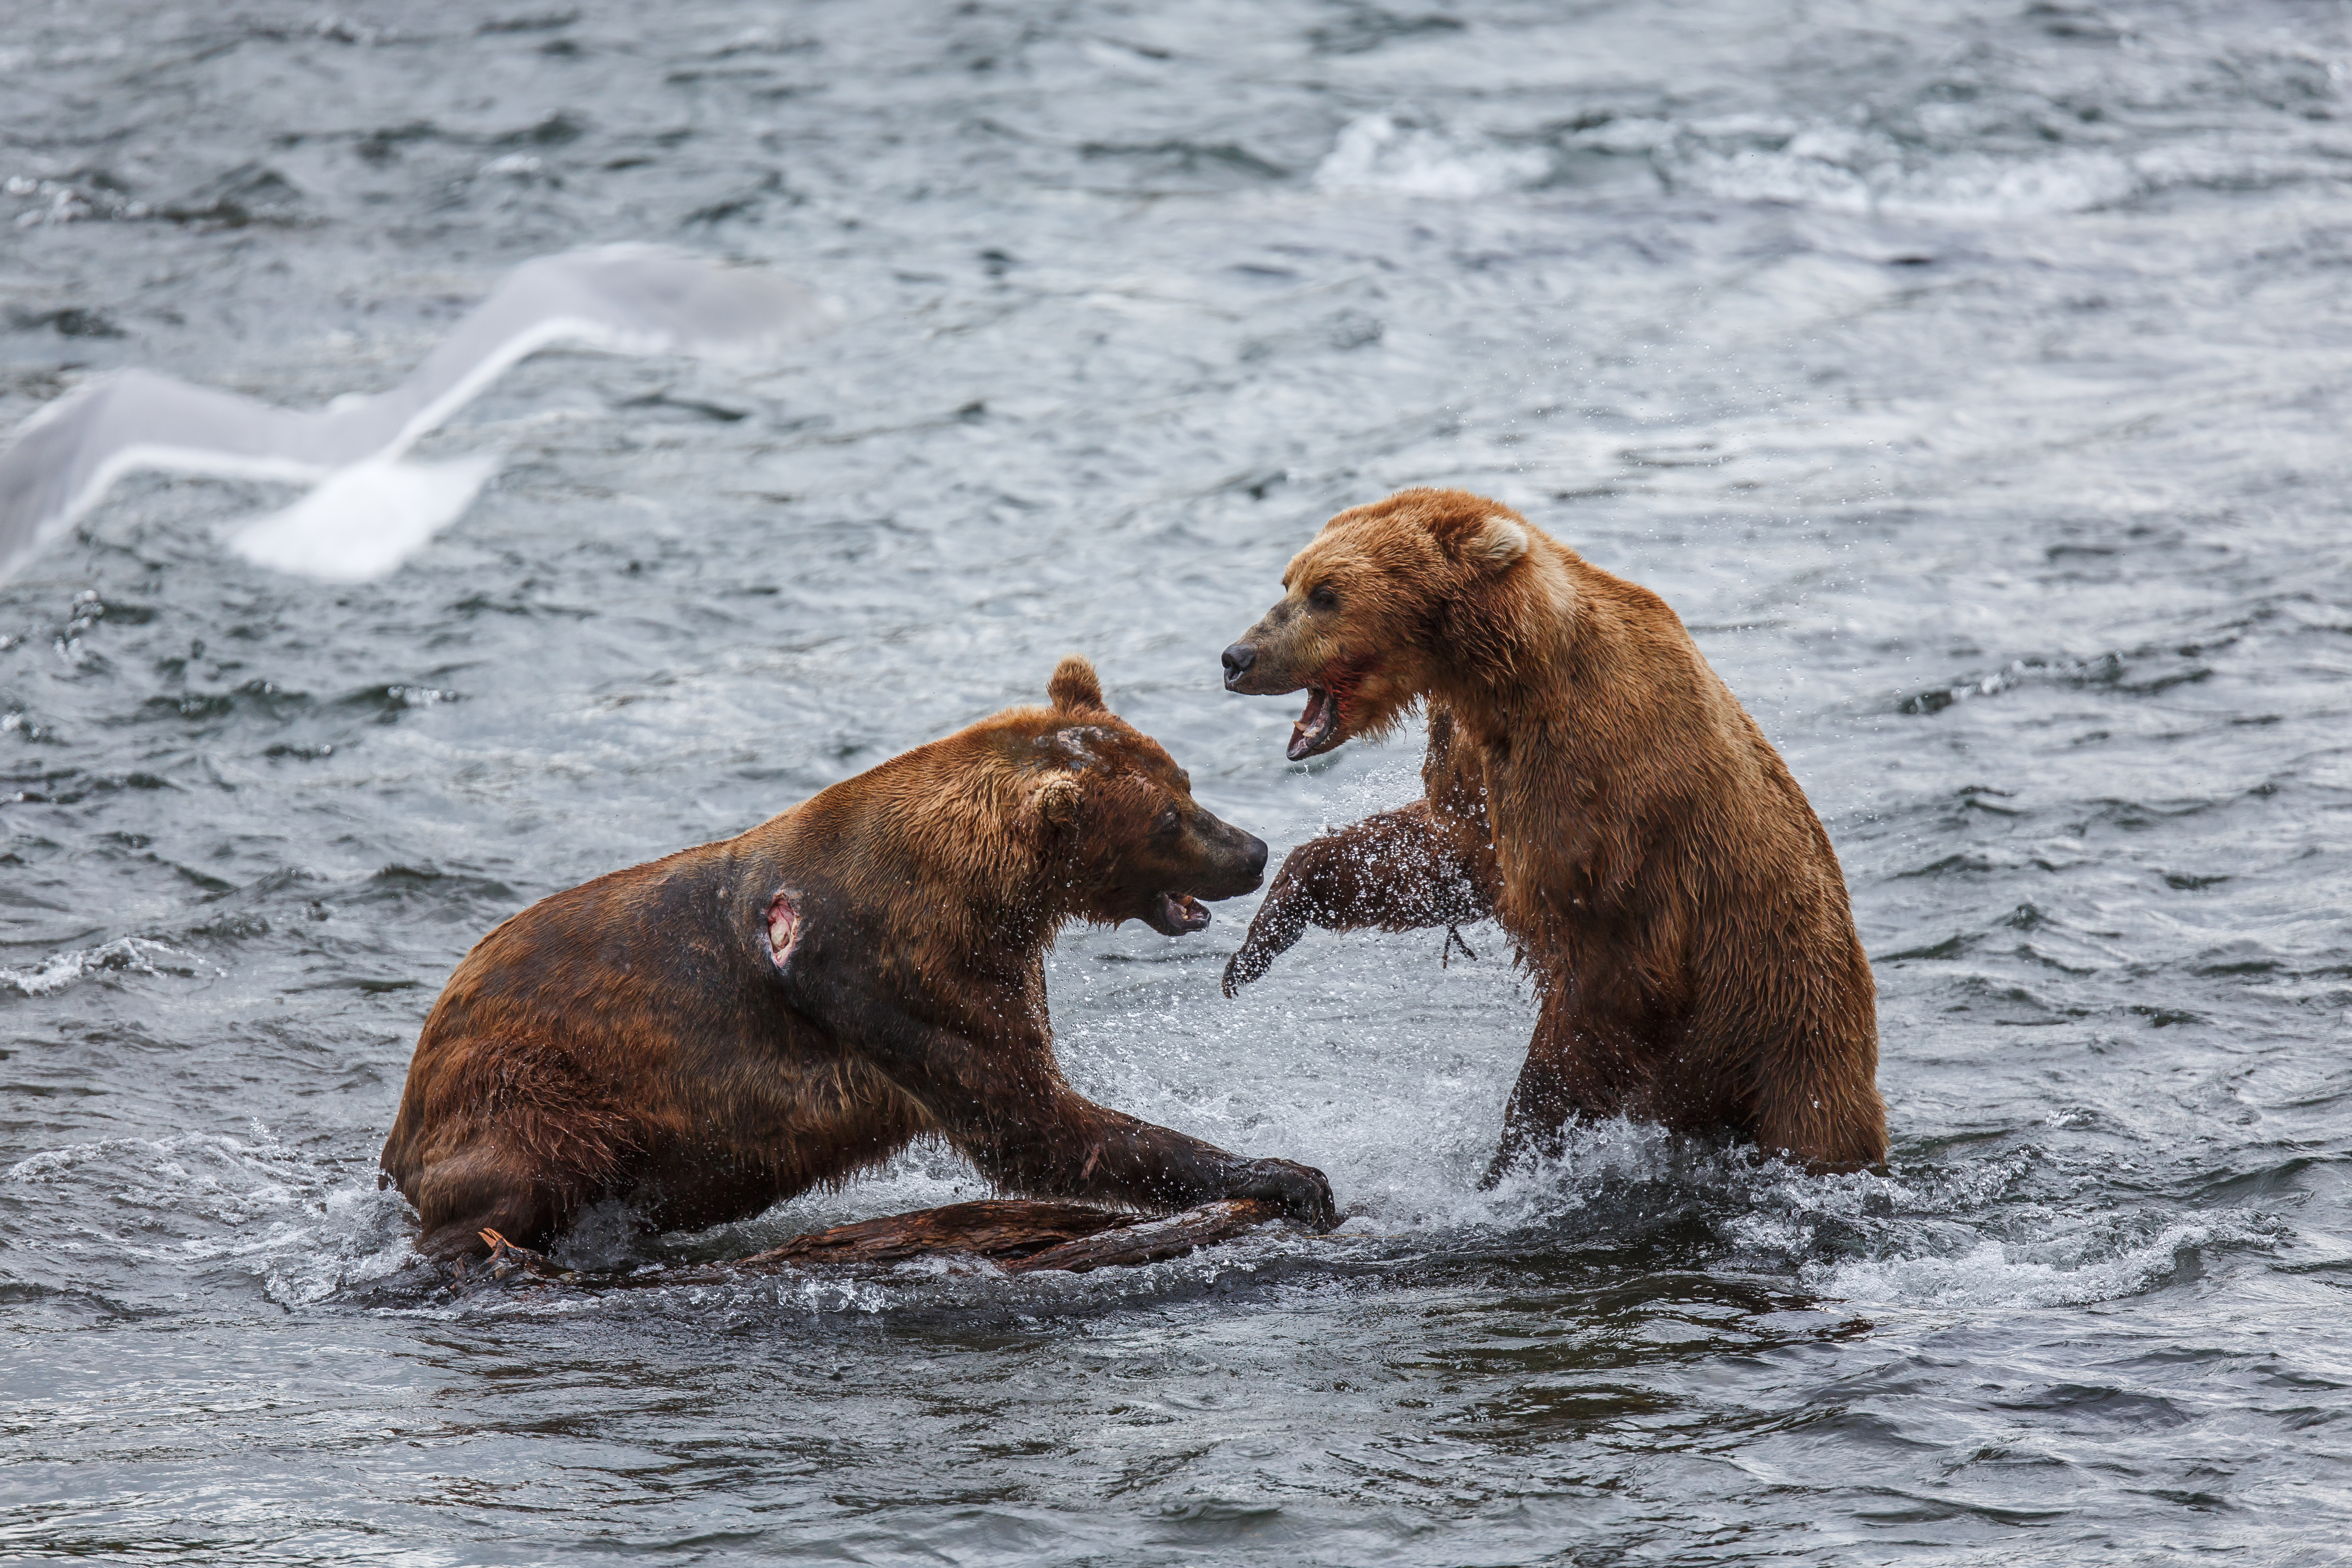 Experience an Amazing Vacation in Alaska in 8 Days with Your Family - Bears Catching Salmon in the Kenai River